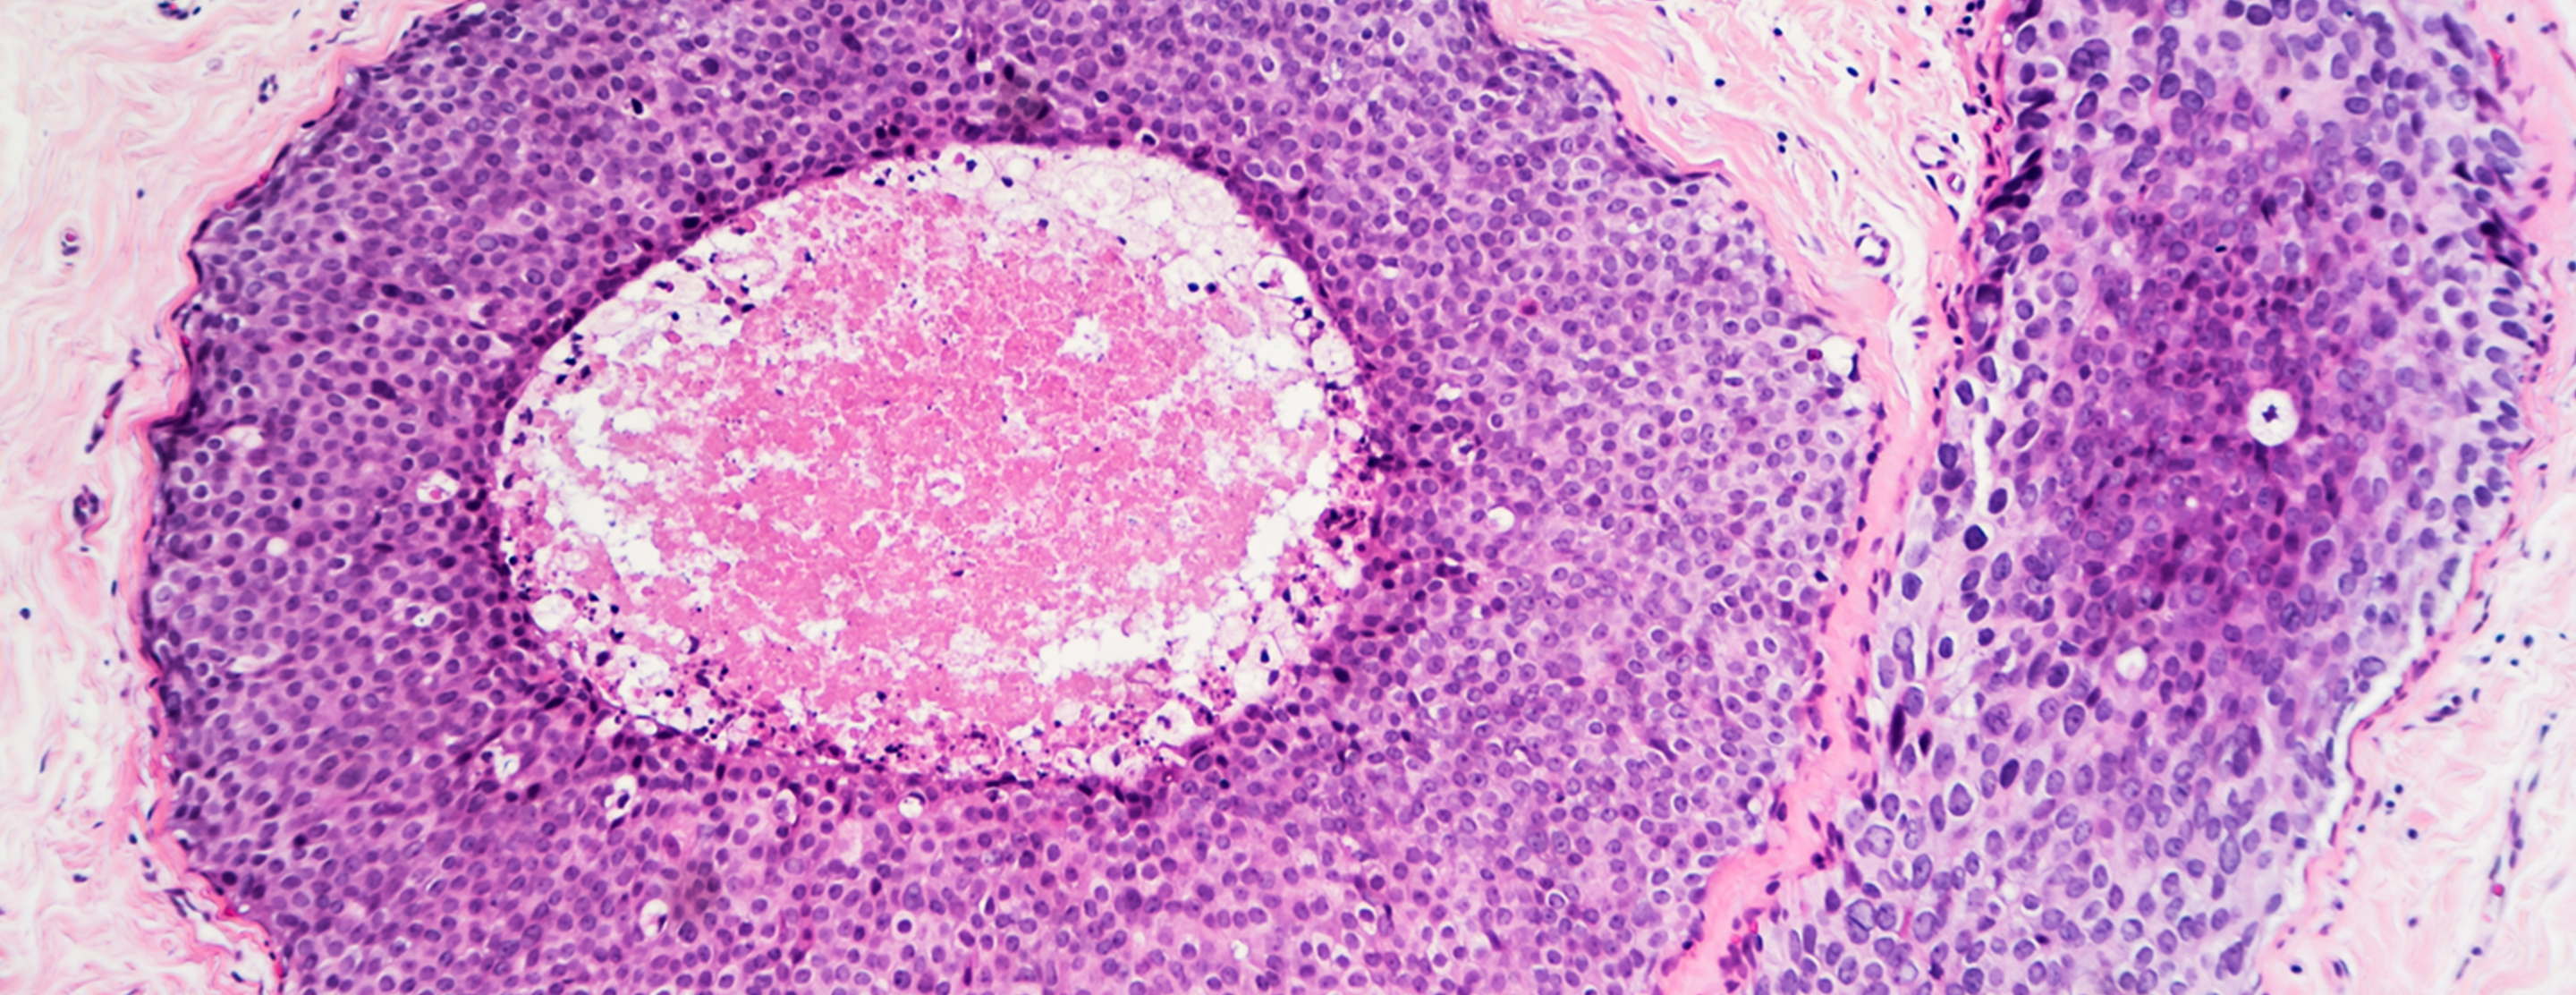 Fine Needle Aspiration (FNA) of the Breast